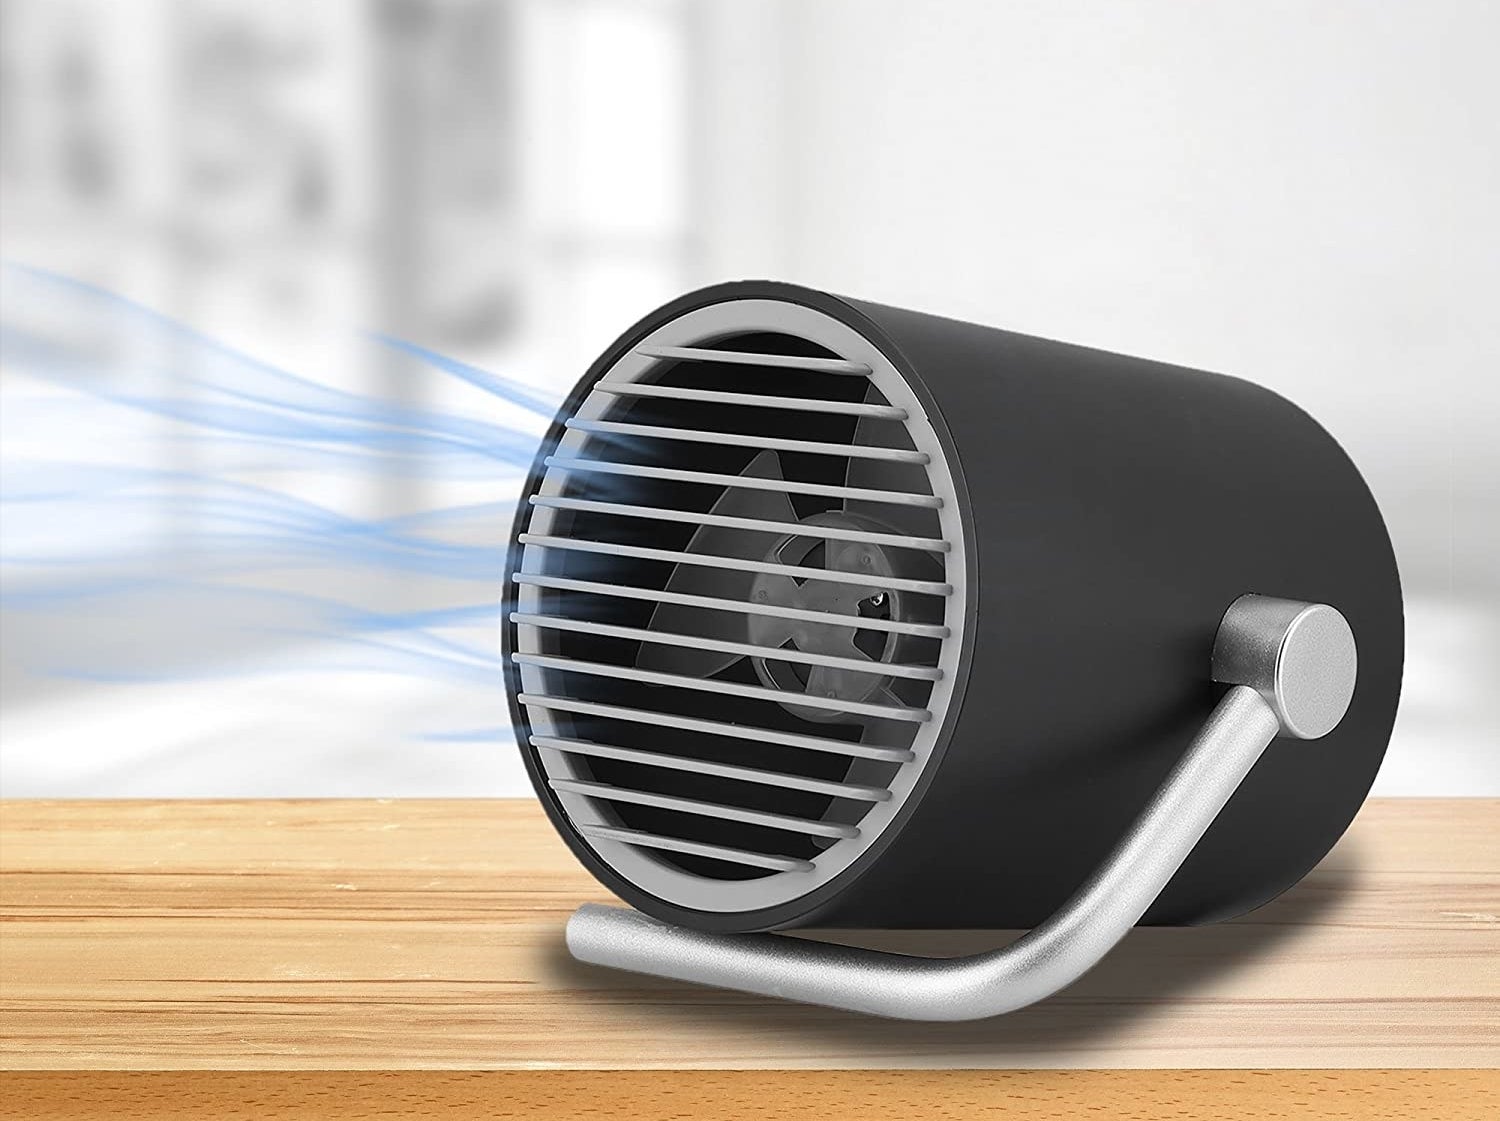 A desk fan on top of a desk blowing cold air